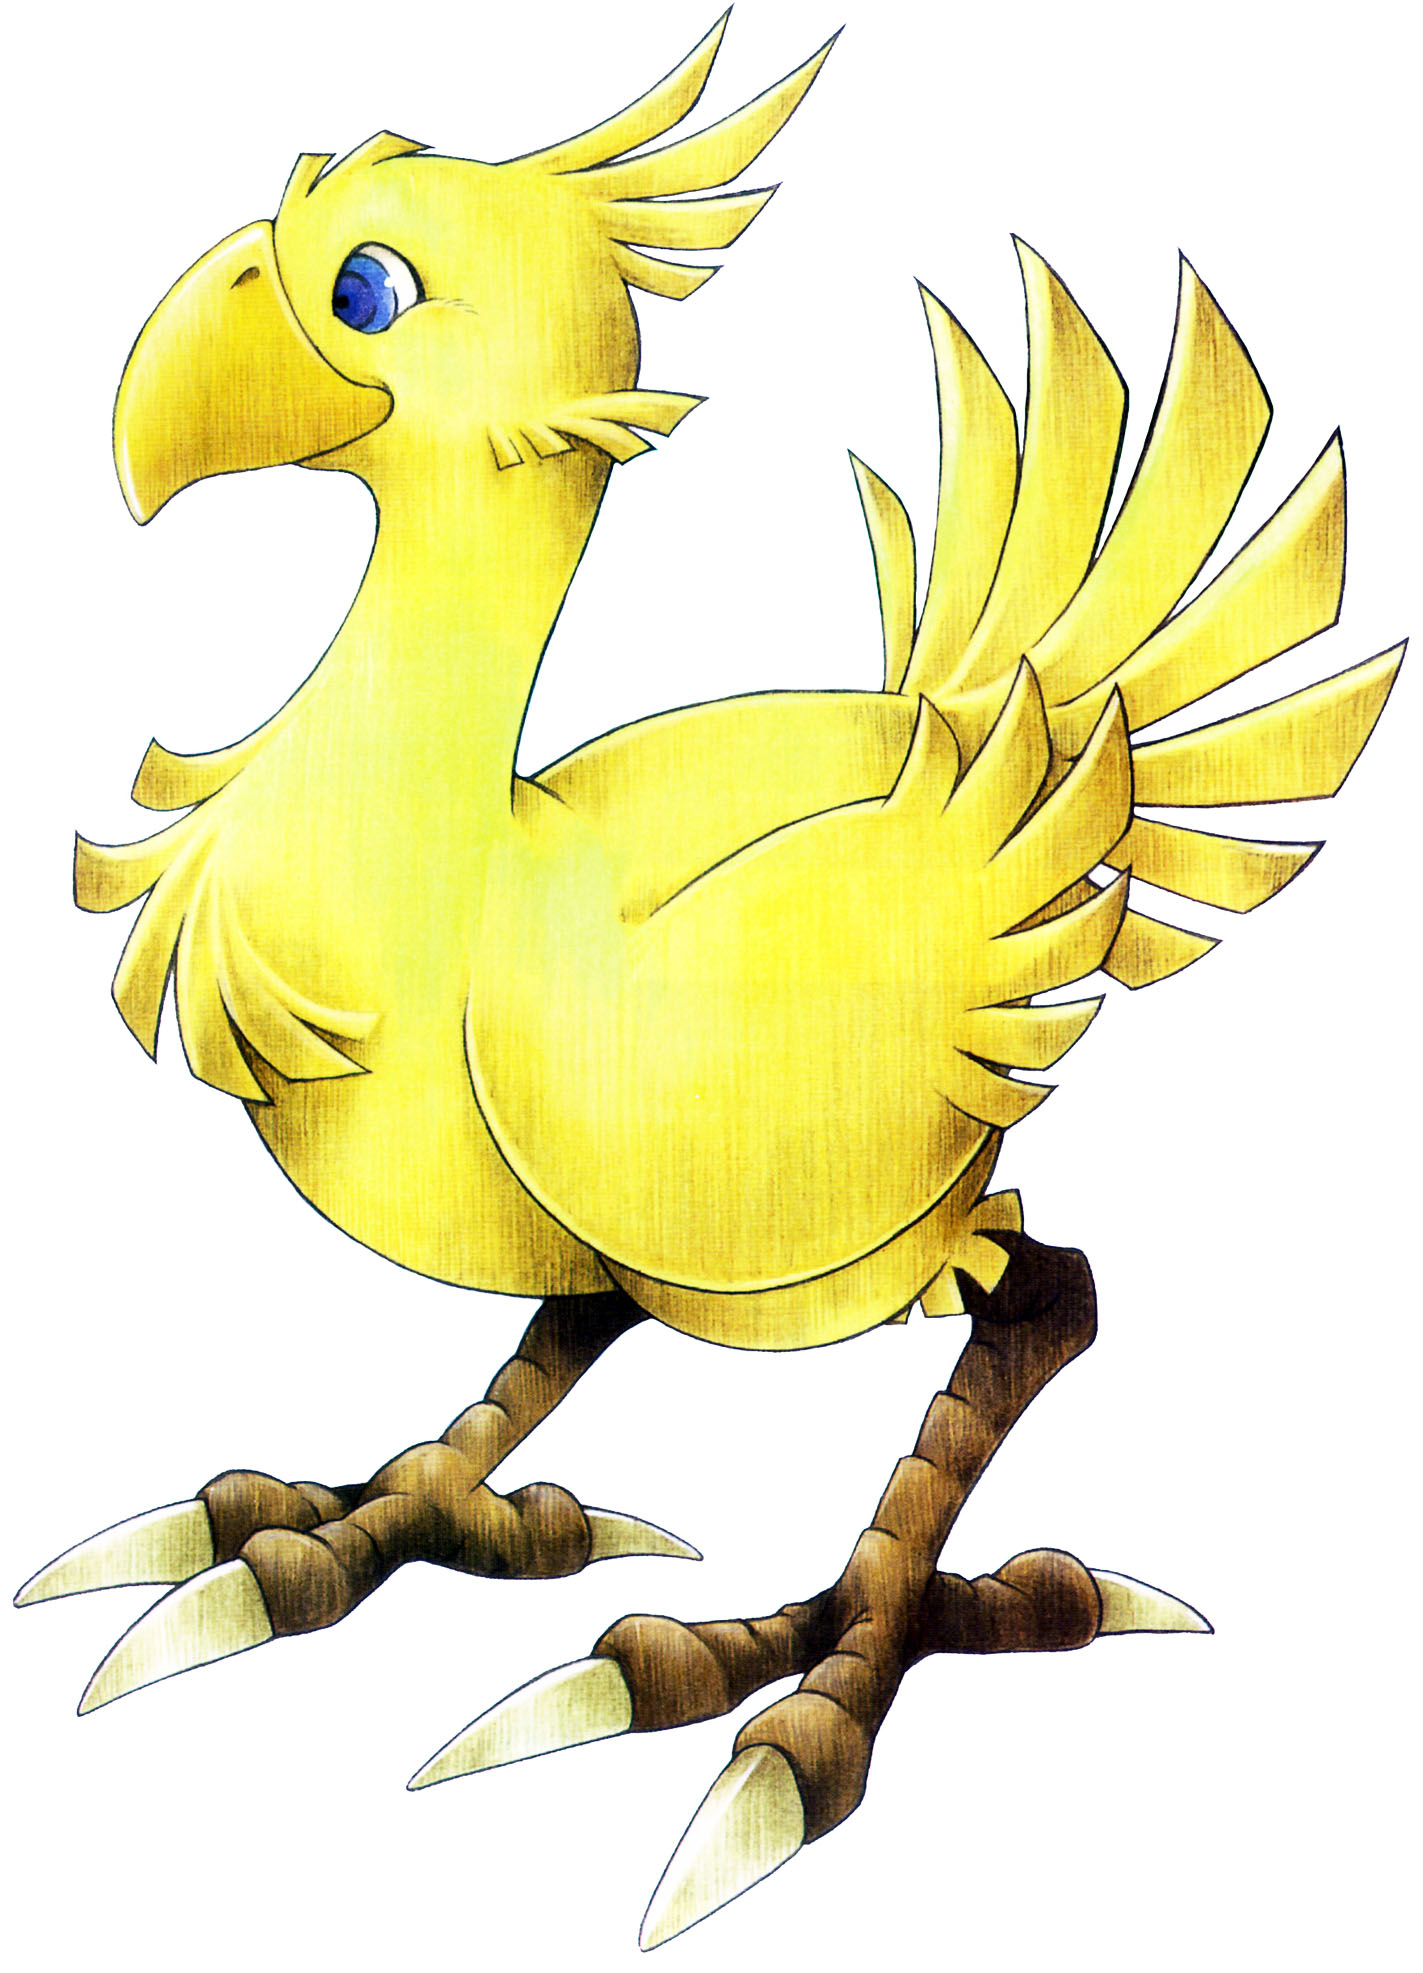 The Chocobos From Final Fantasy Series Game Art 